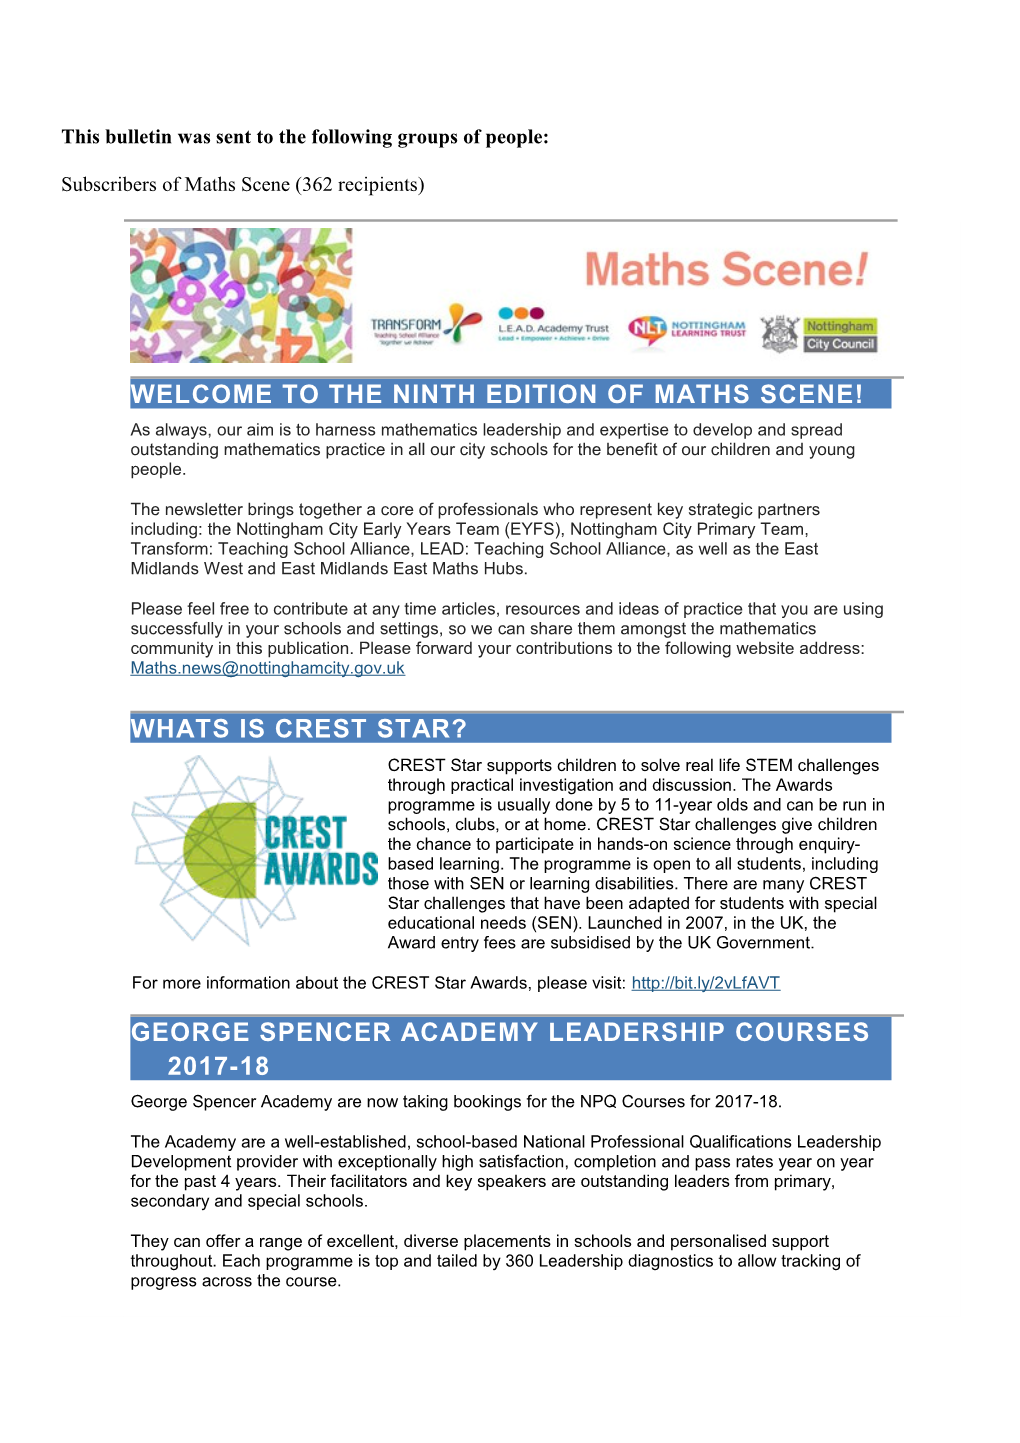 Welcome to the Ninth Edition of Maths Scene!